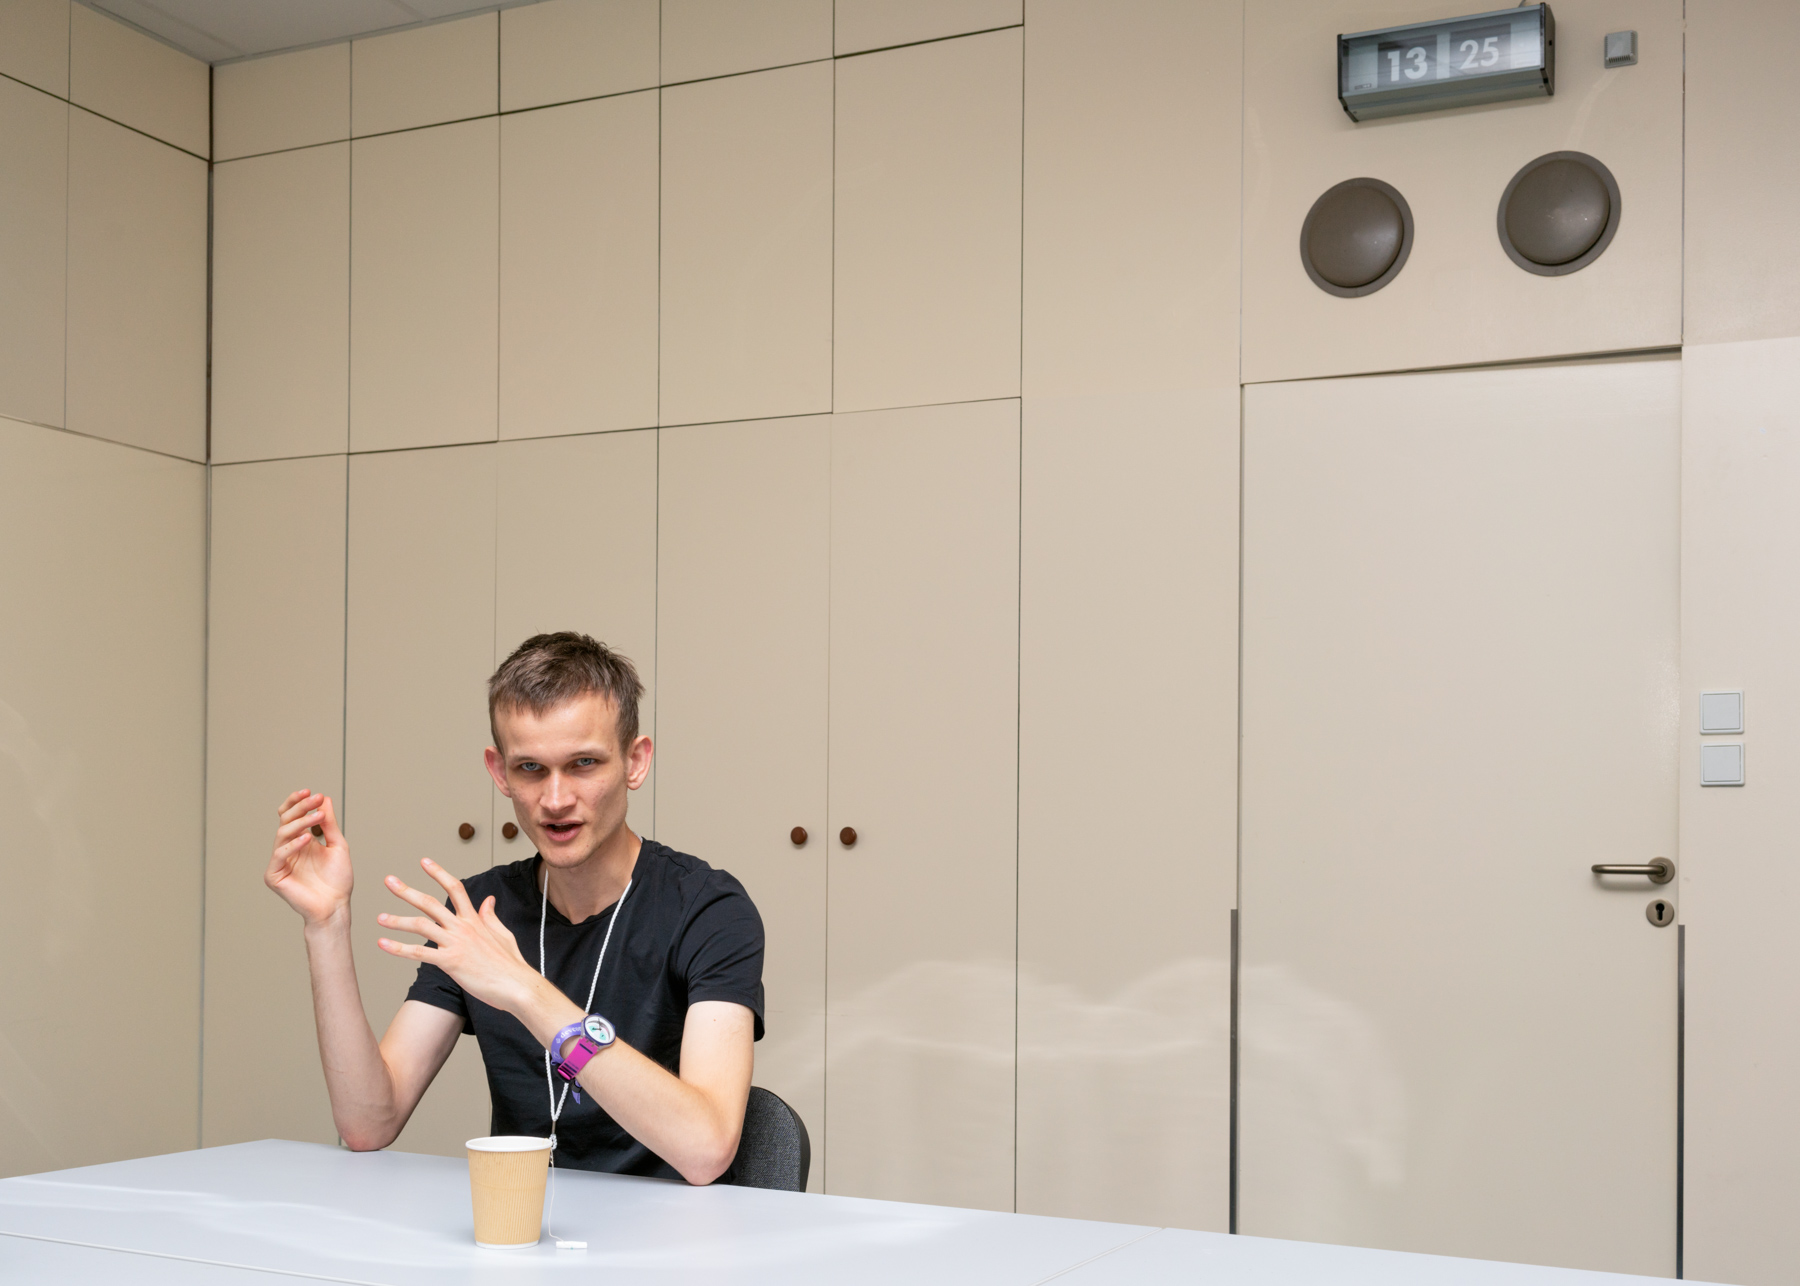 Vitalik Buterin The chaos in Canada shows the existence of